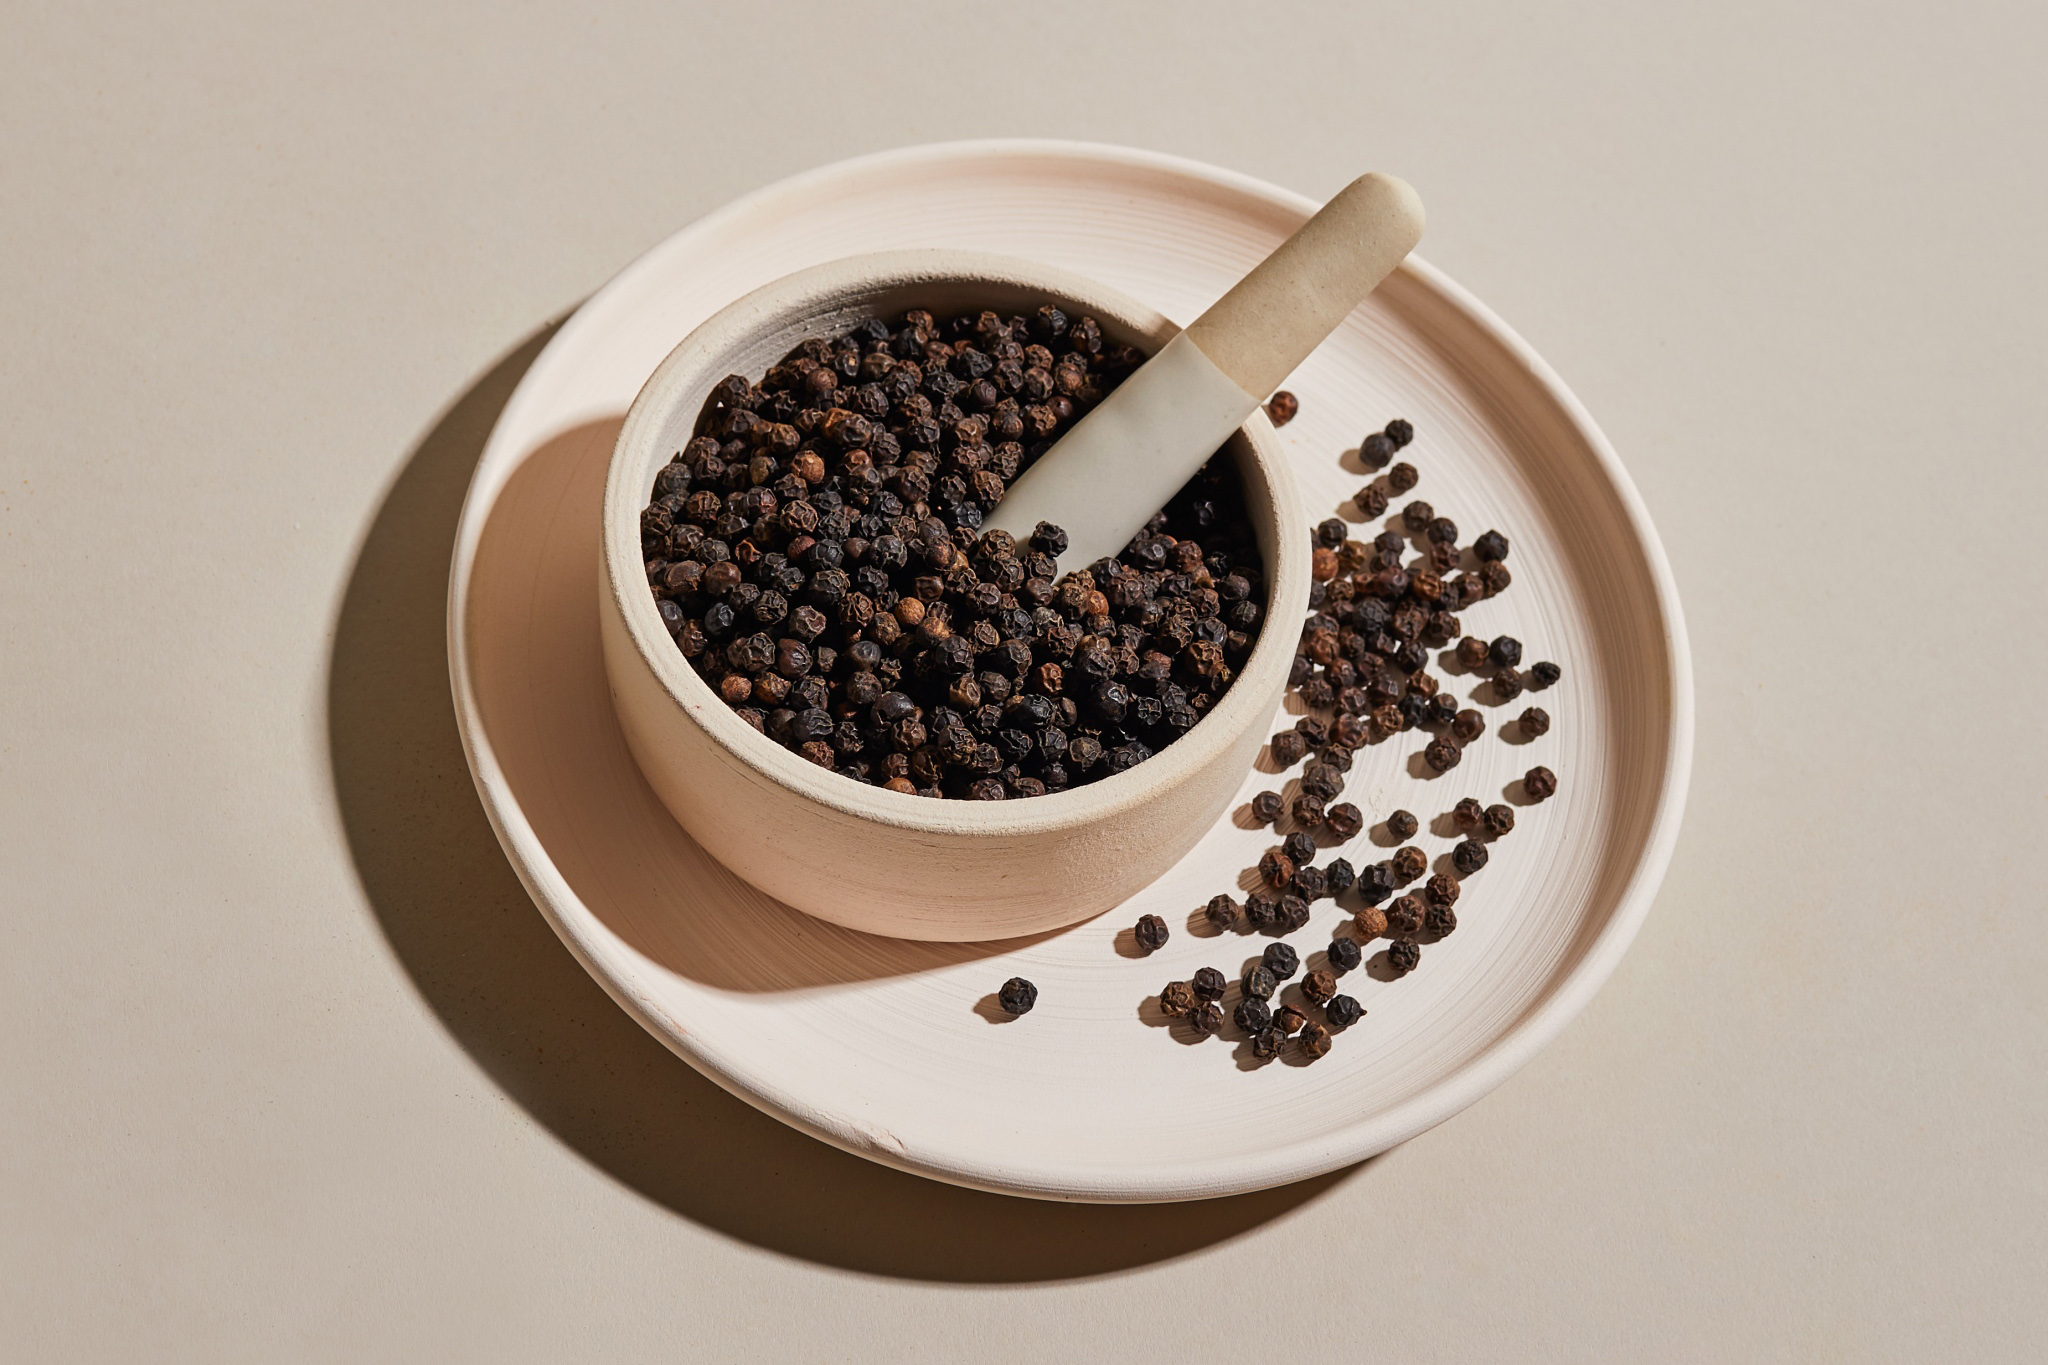 Tellicherry peppercorn from the Spice House